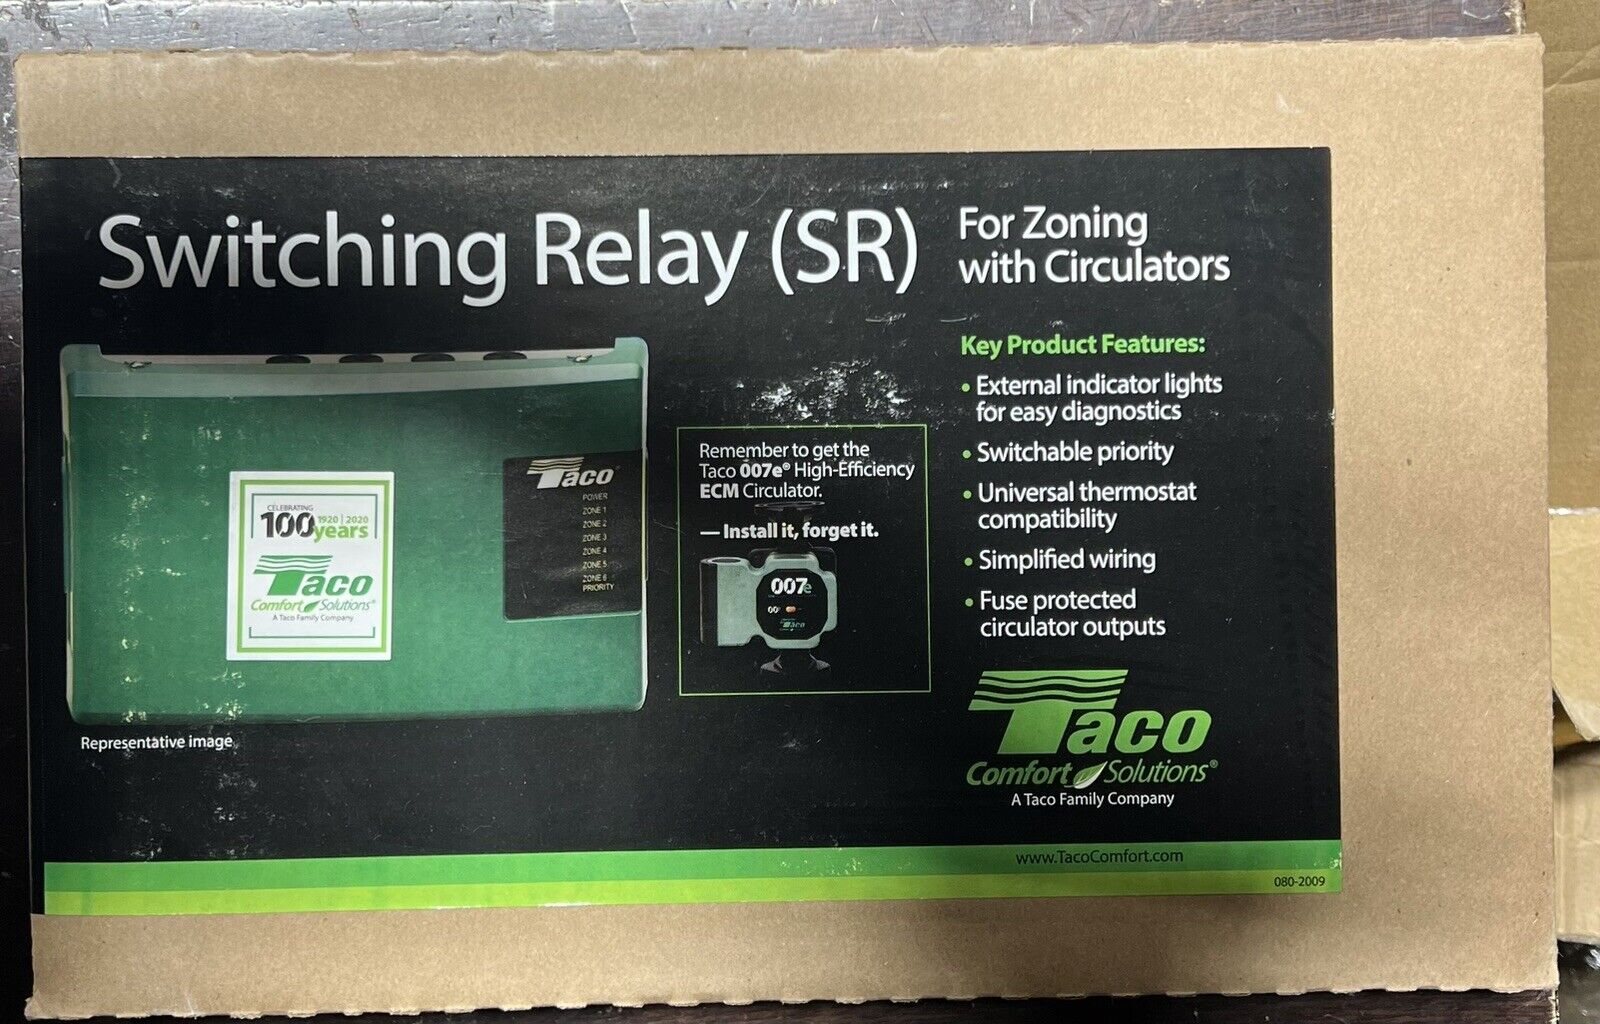 NEW Taco SR503-4 • 3 Zone Switching Relay Brand New In Box